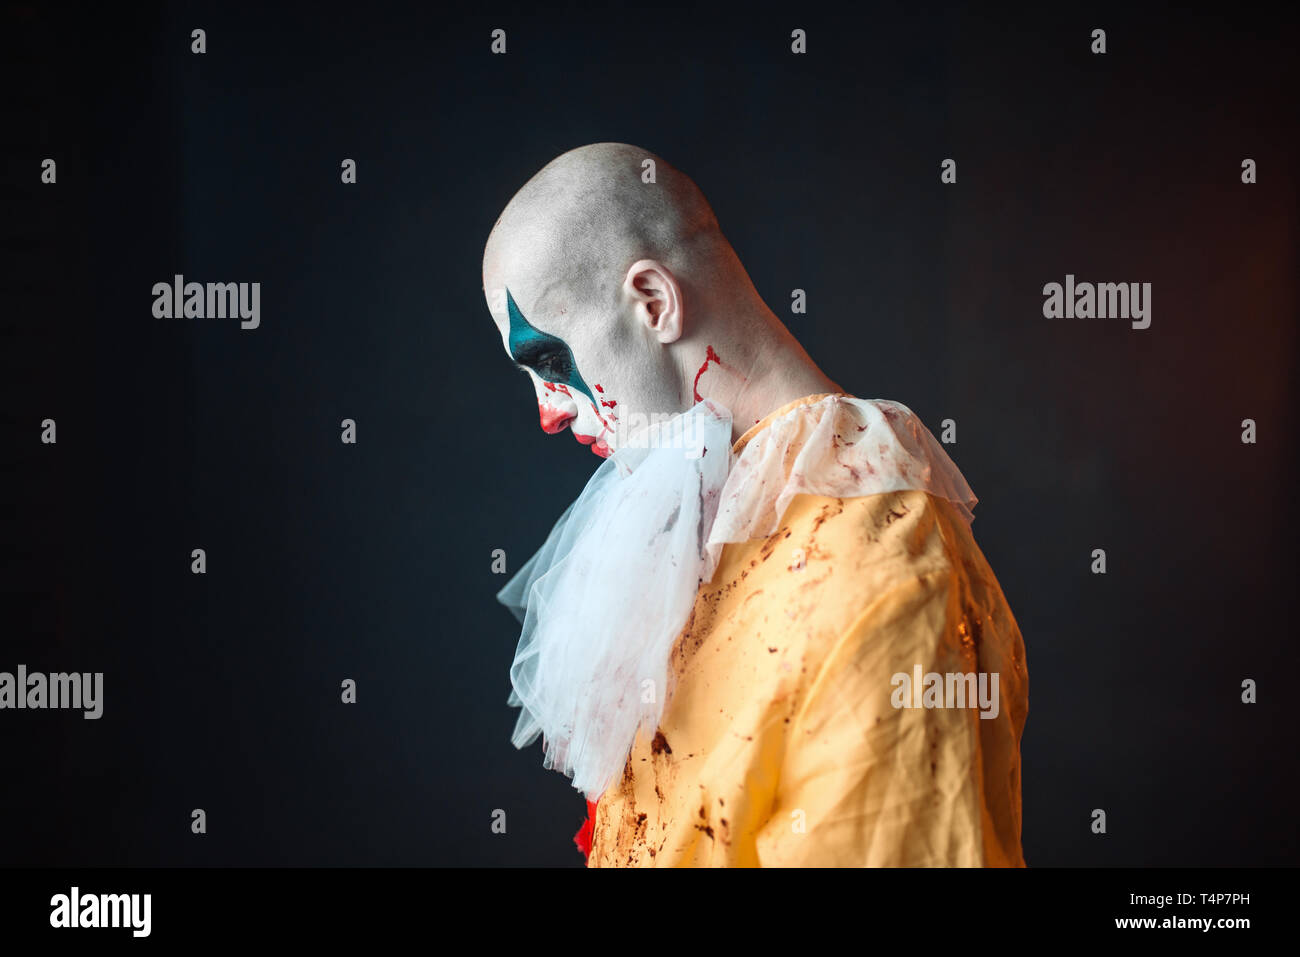 Sad bloody clown with makeup in carnival costume, side view. Crazy maniac, scary monster Stock Photo